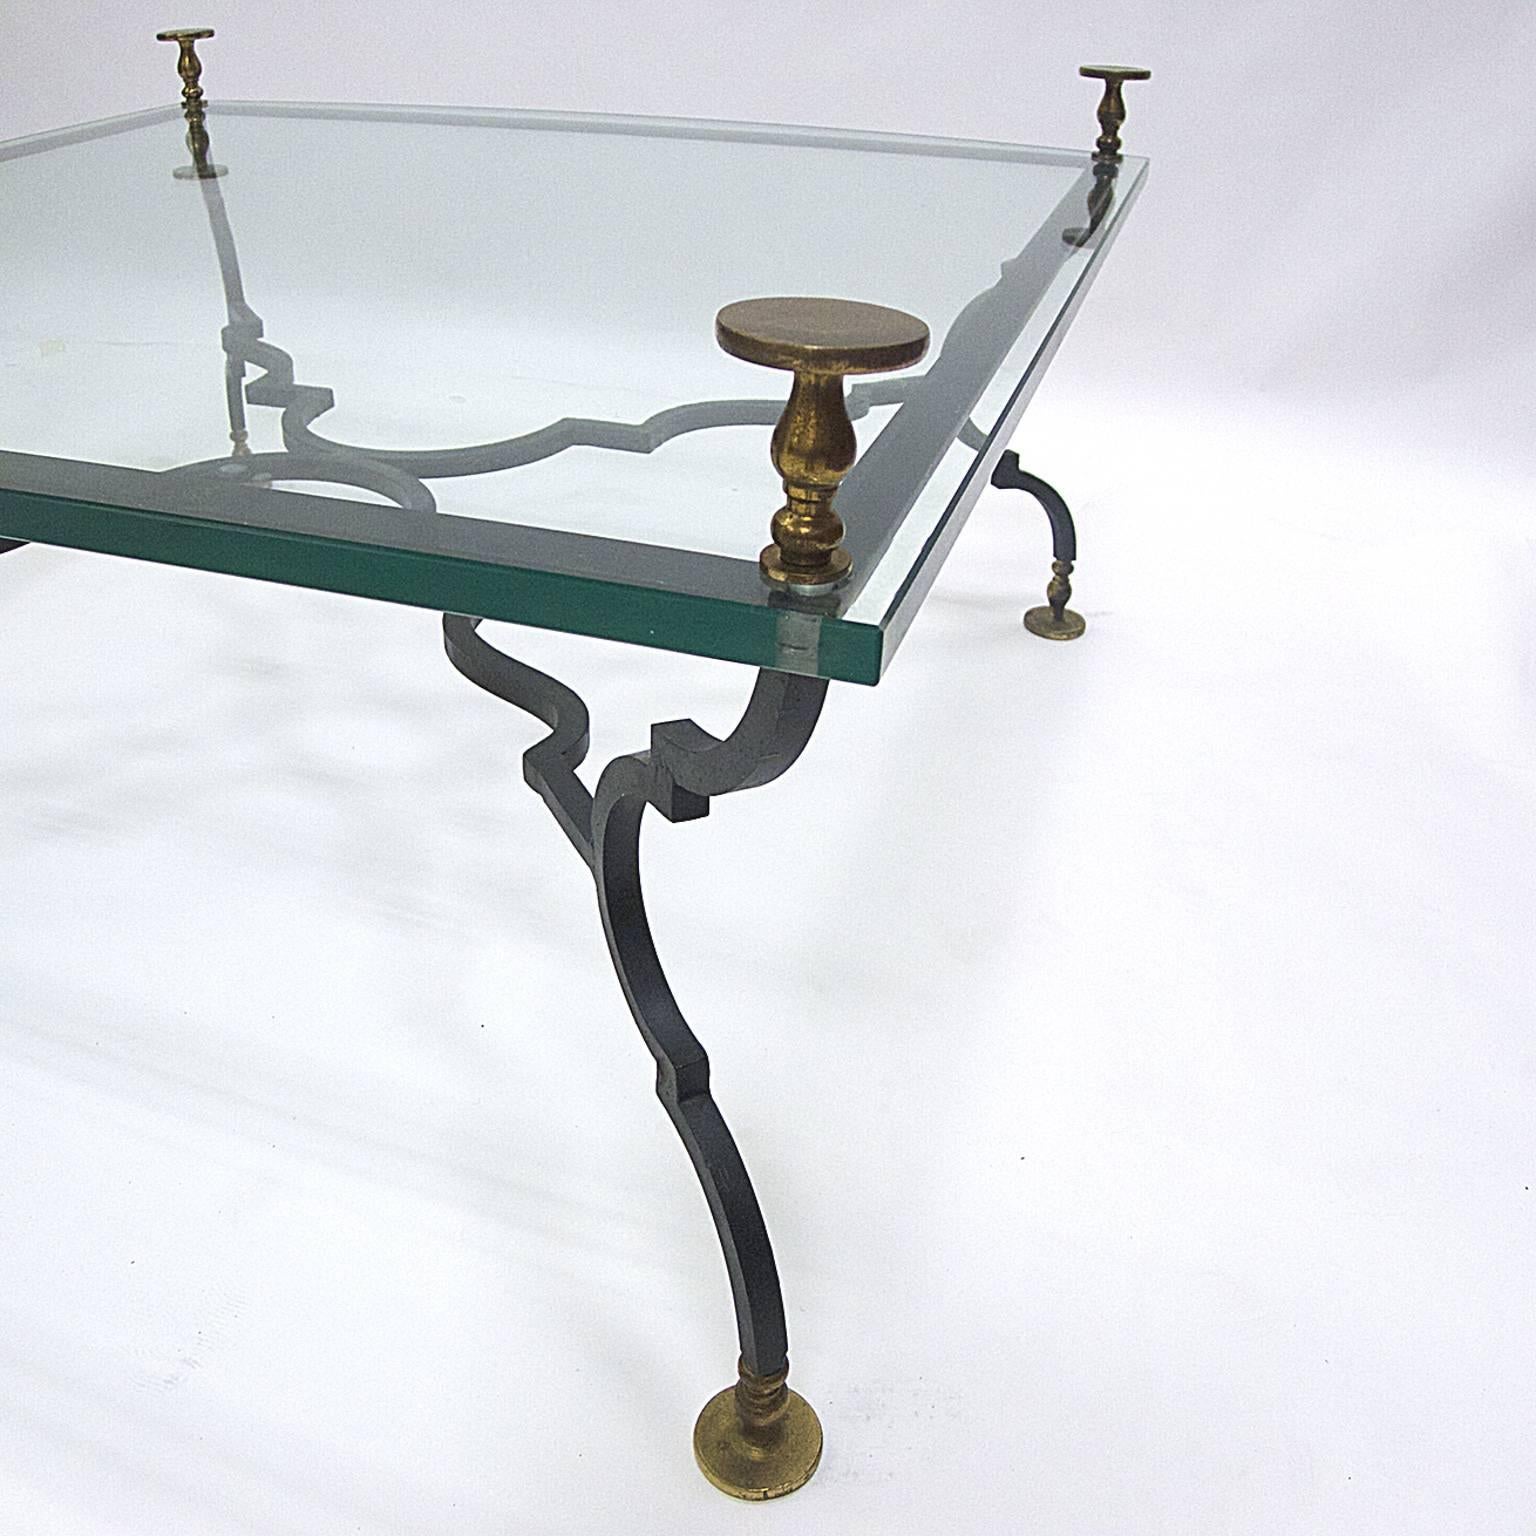 Very heavy decorative wrought iron and glass table with solid brass feet and finials. This table is stunning!